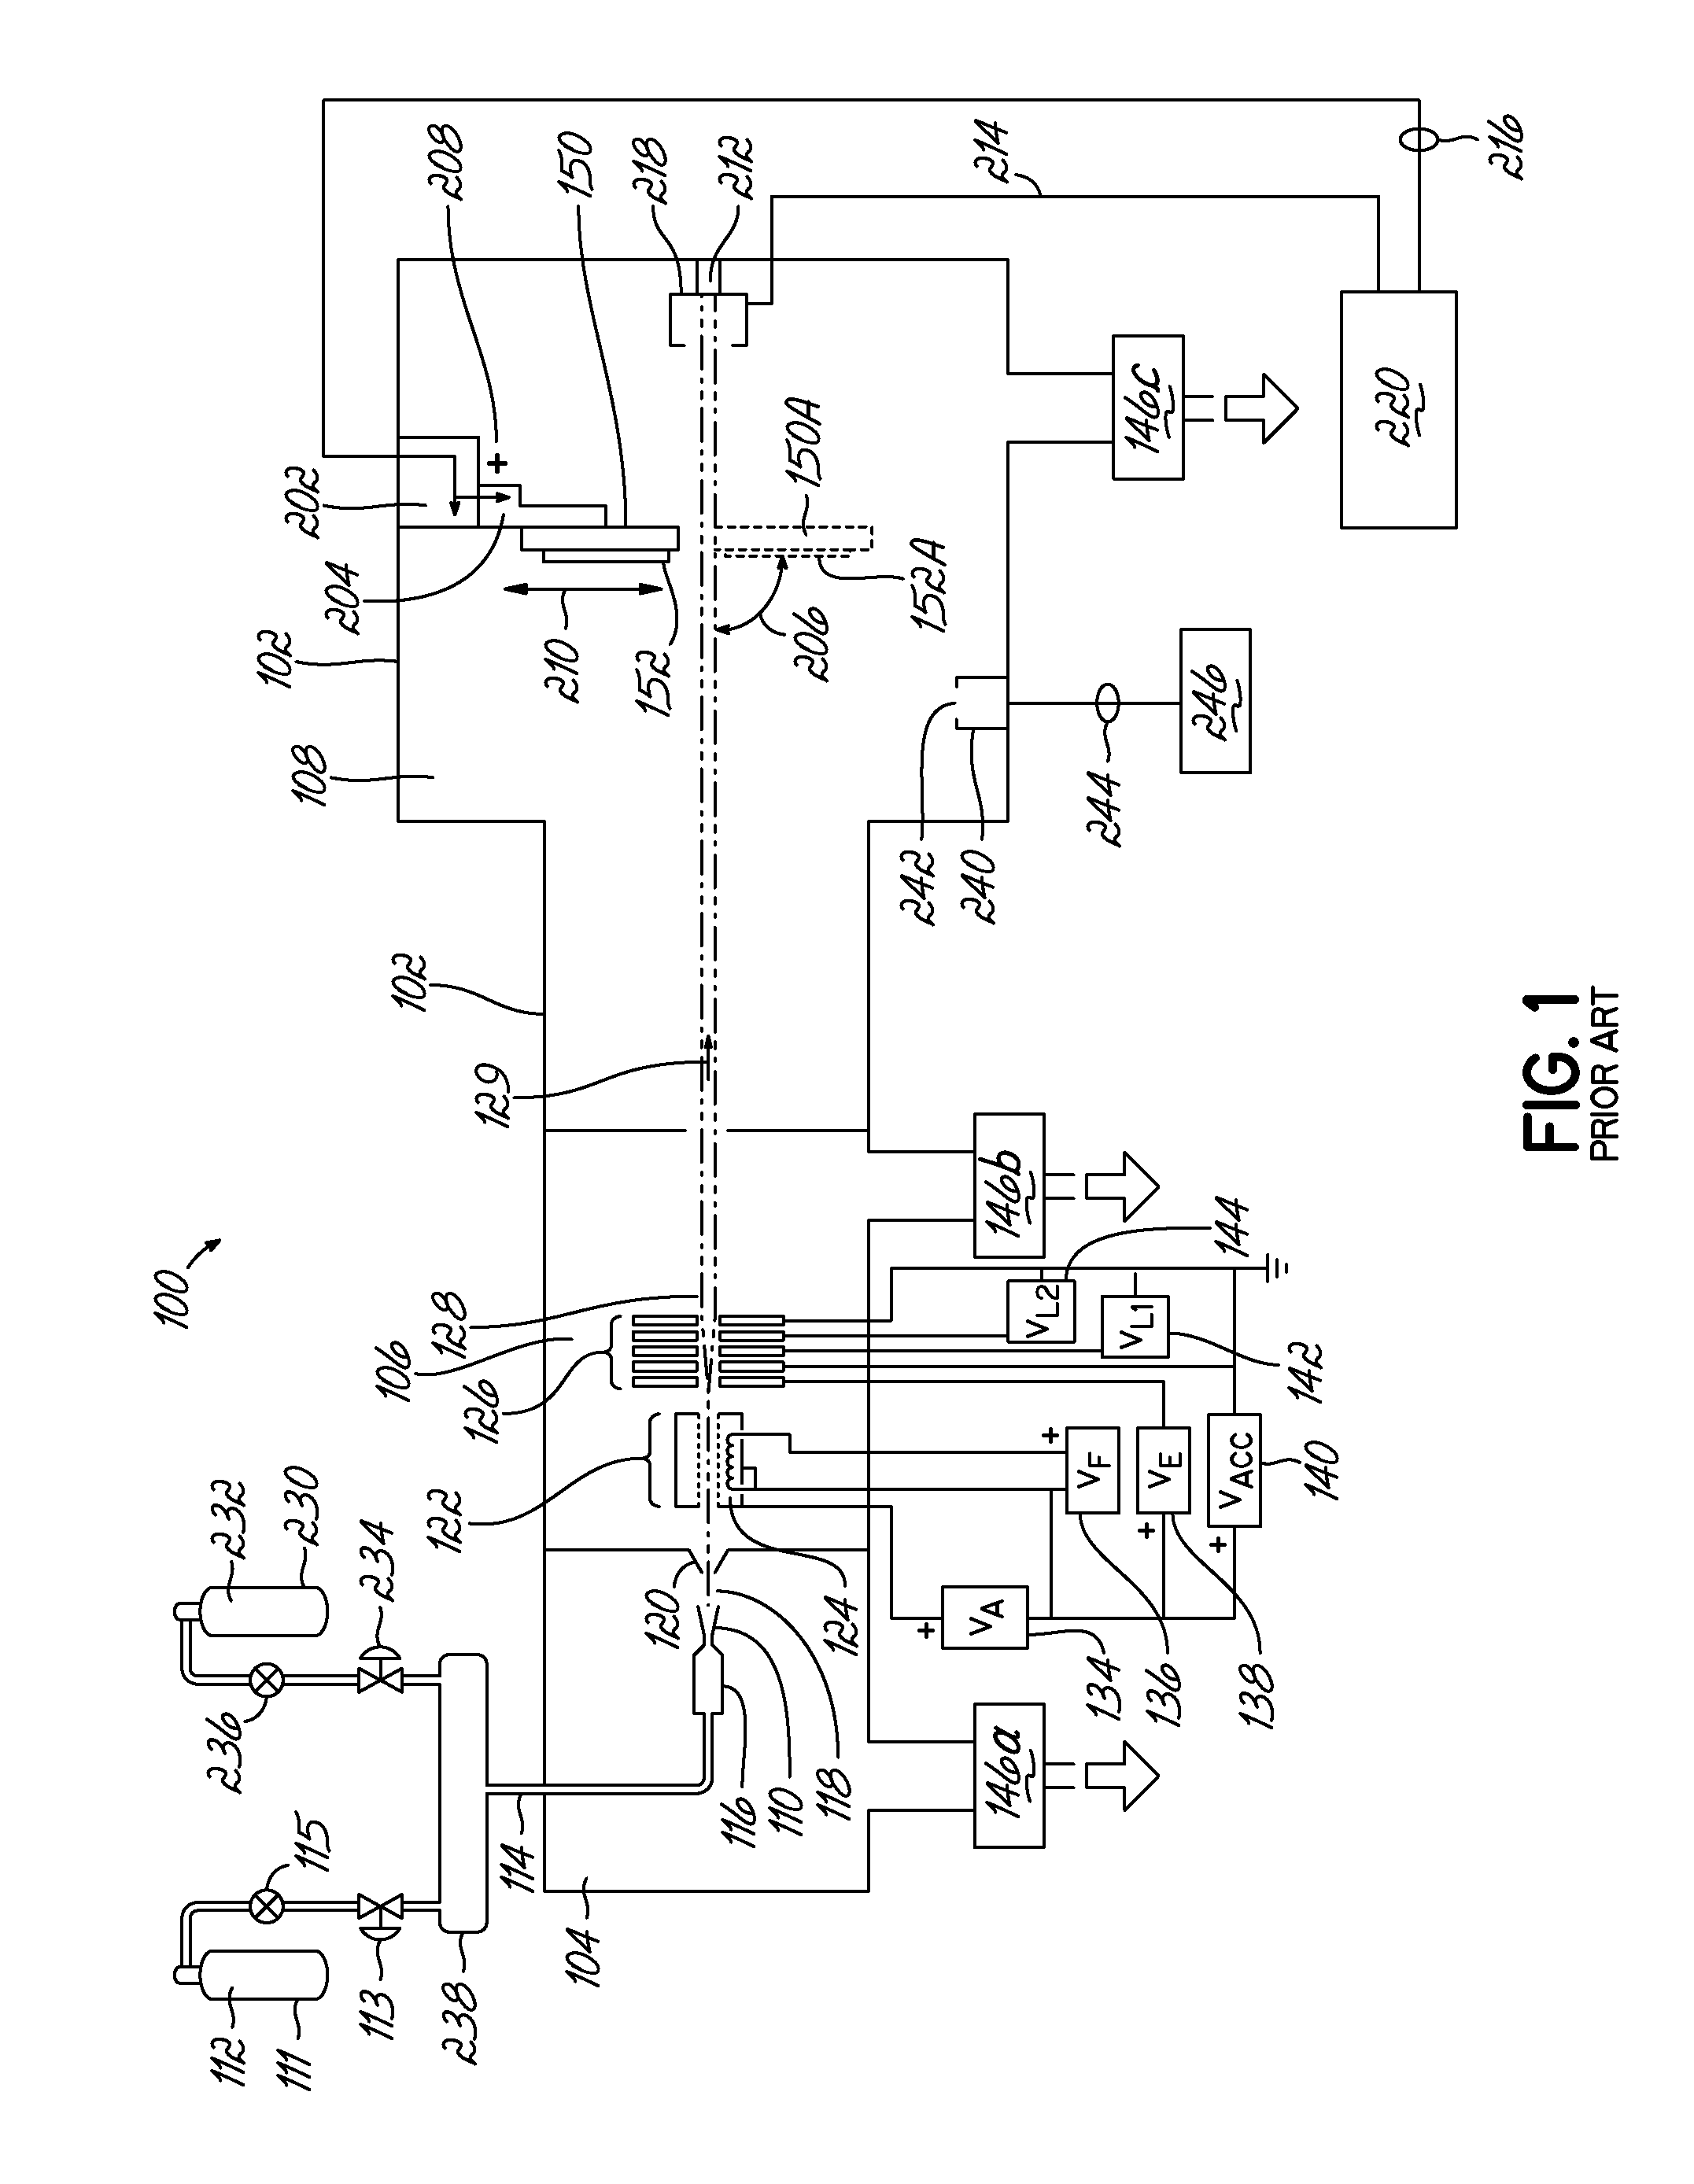 Method and apparatus for controlling a gas cluster ion beam formed from a gas mixture